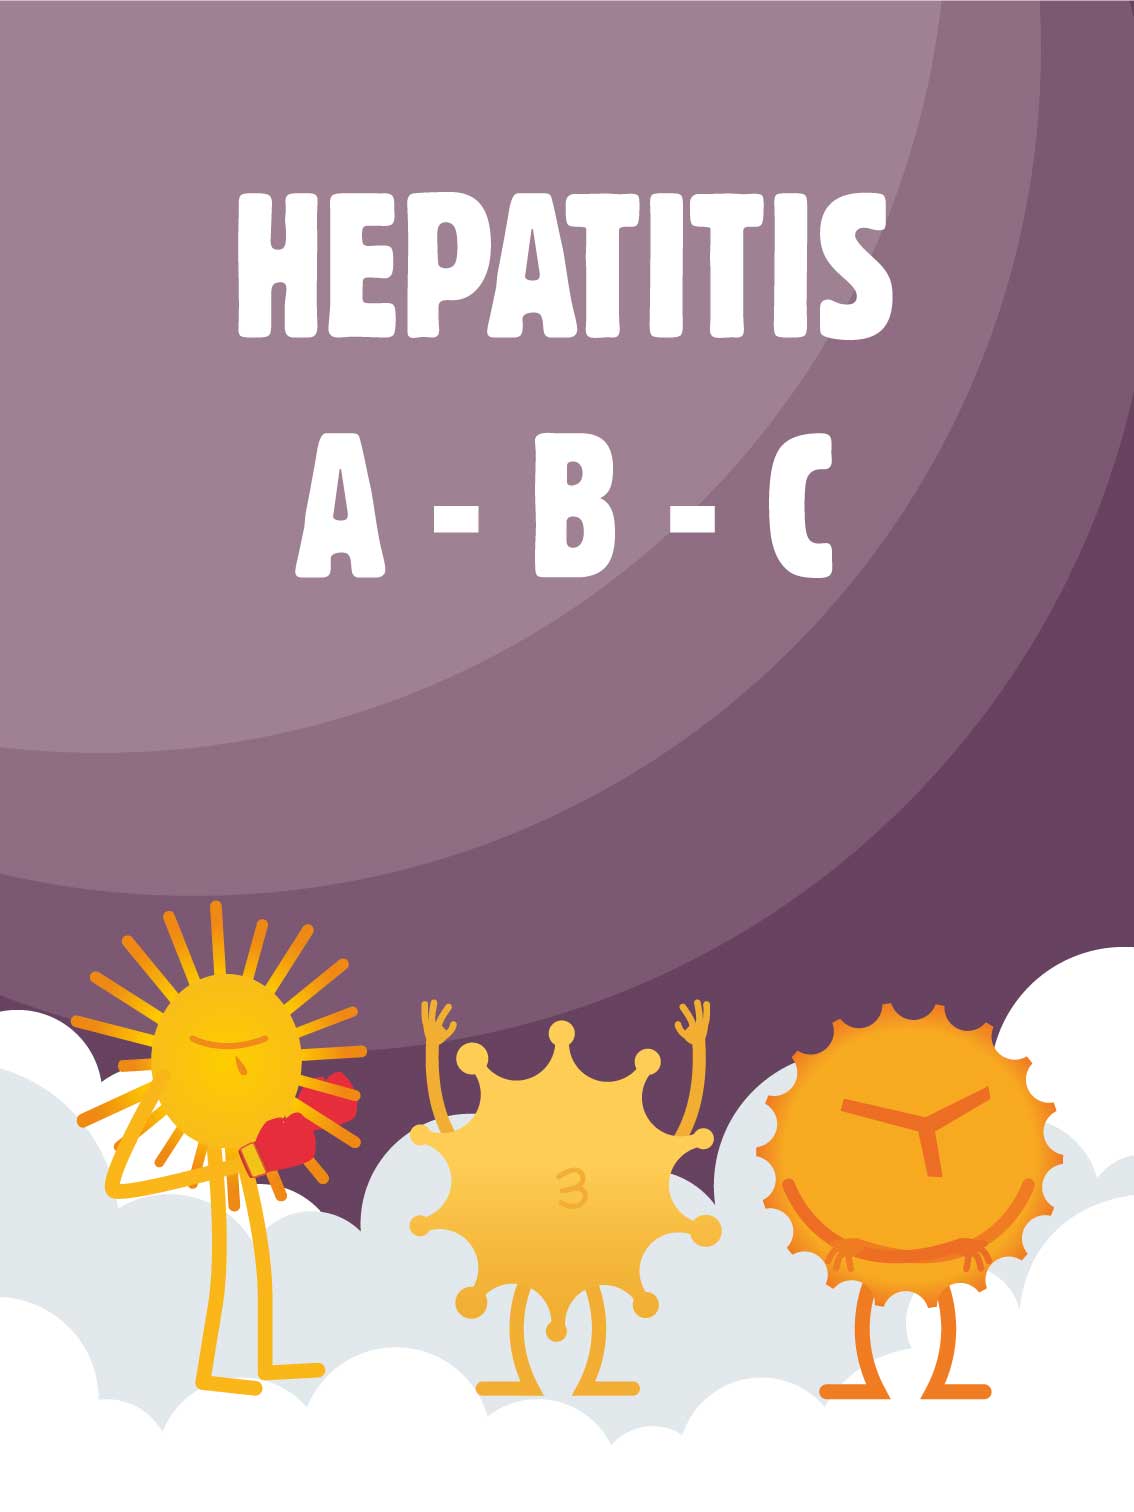 Hepatitis A, B, C, screening, STIs, STDs, sexually transmitted infections, unsafe sex